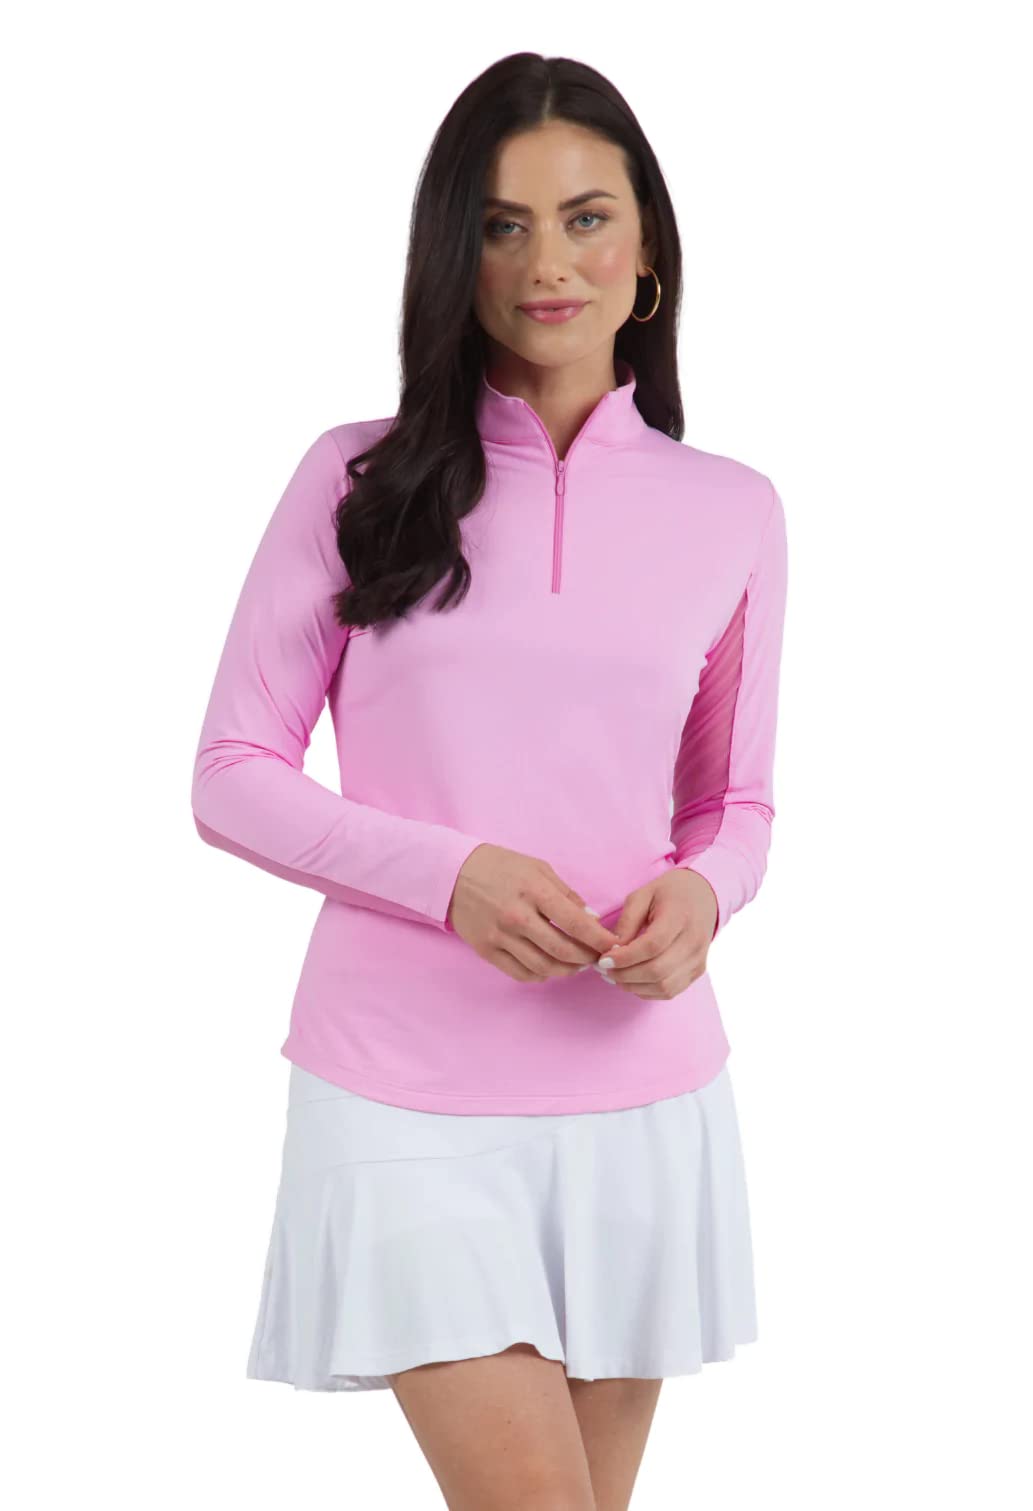 IBKUL Athleisure Wear Sun Protective UPF 50+ Icefil Cooling Tech Long Sleeve Mock Neck Top with Under Arm Mesh 80000 Watermelon Solid L